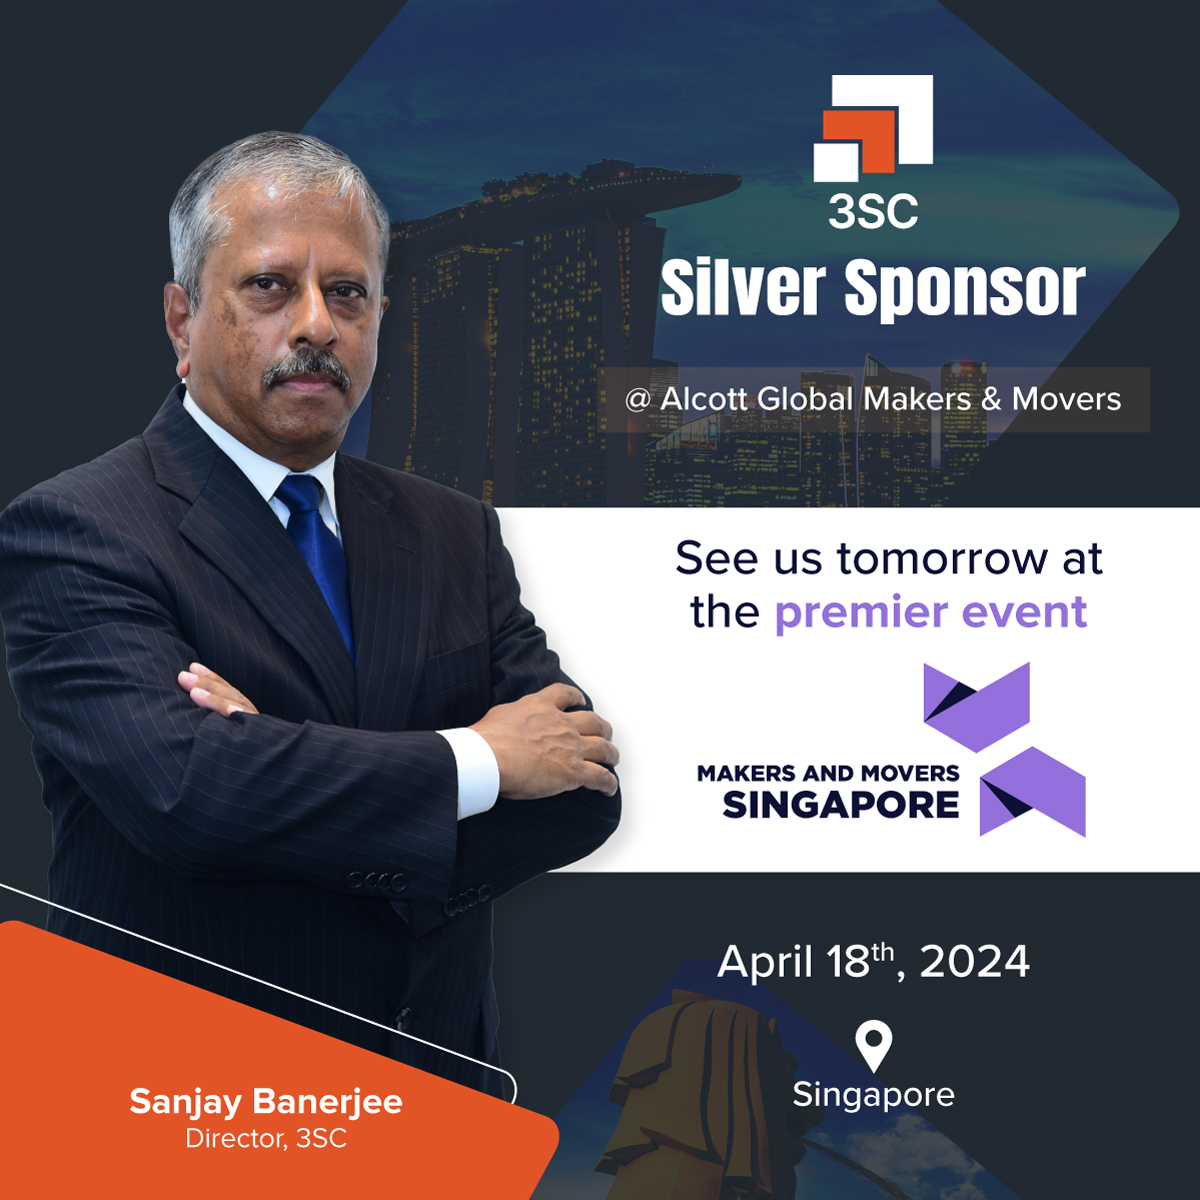 Just 24 hours for the headliner #LeadershipEvent to go live!

Join us tomorrow in #Singapore as 3SC proudly sponsors Alcott Global's #MakersAndMovers #event. Our Director, Sanjay Banerjee, will explore transformative #GlobalSupplyChain opportunities.

#AlcottGlobal #3SC